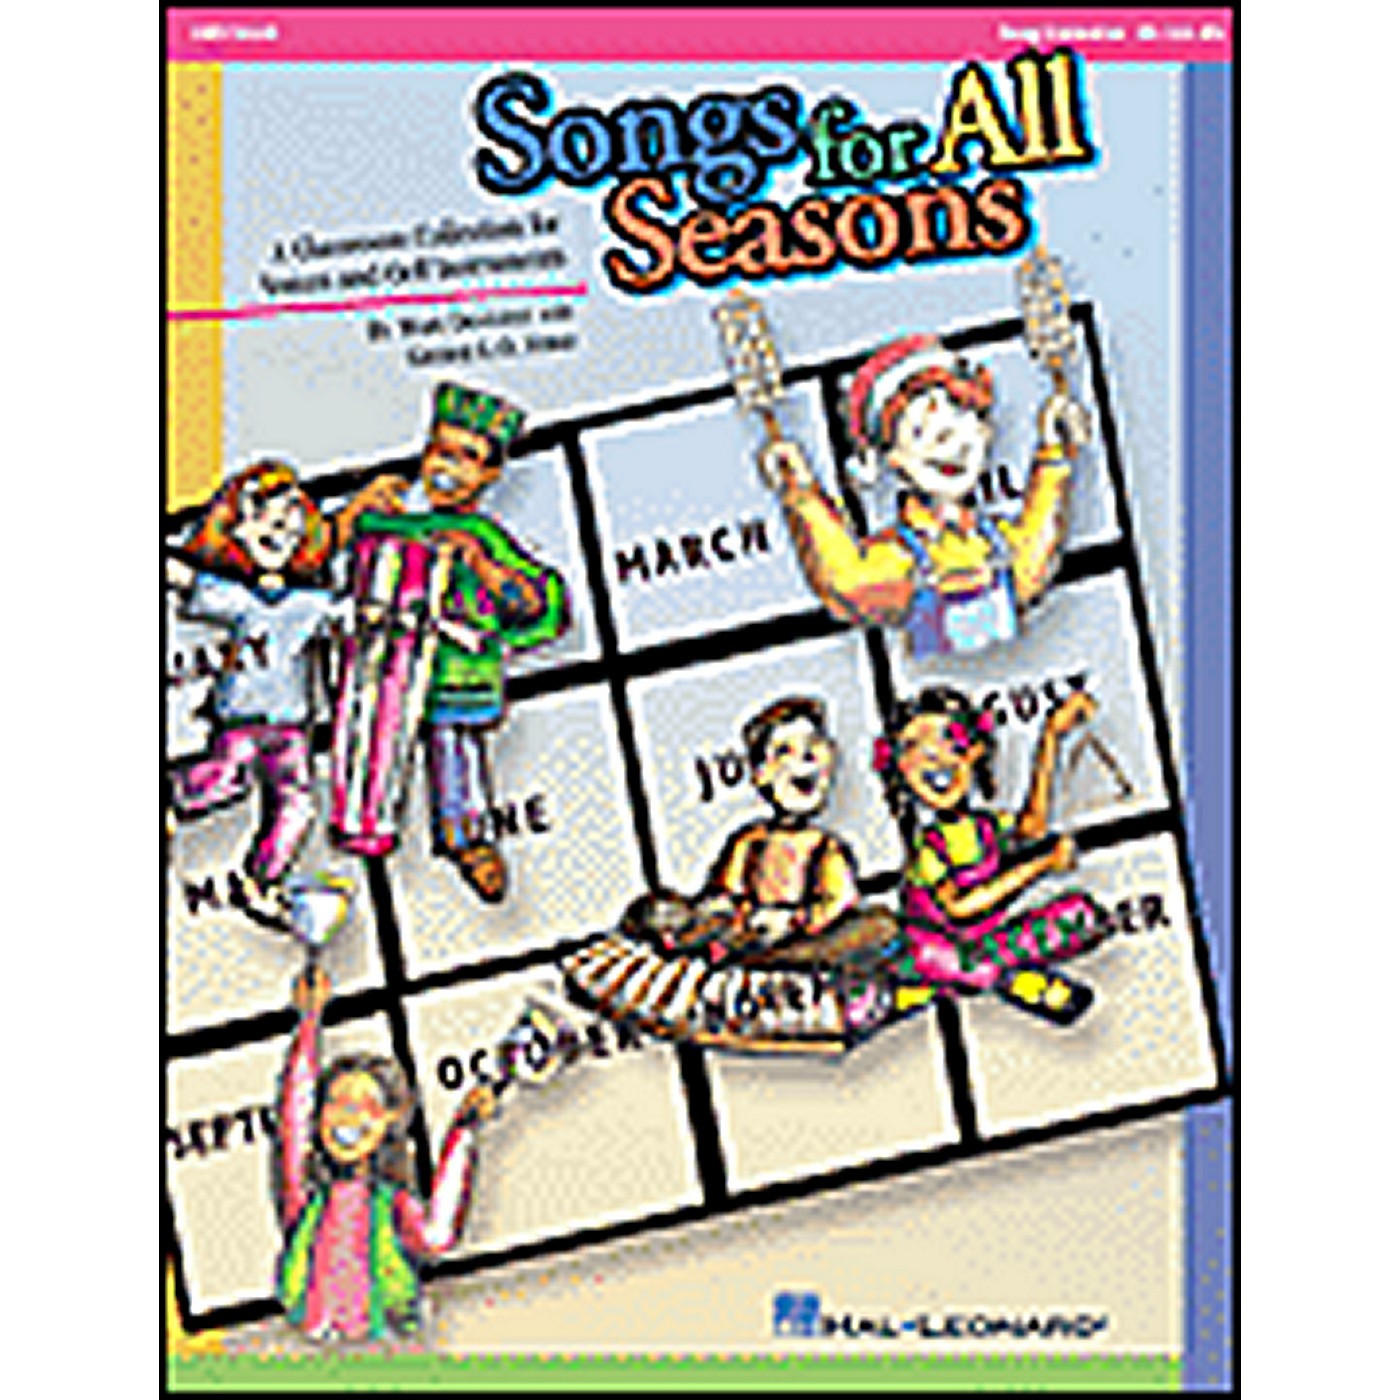 Hal Leonard Songs for All Seasons - Orff Collection Book thumbnail